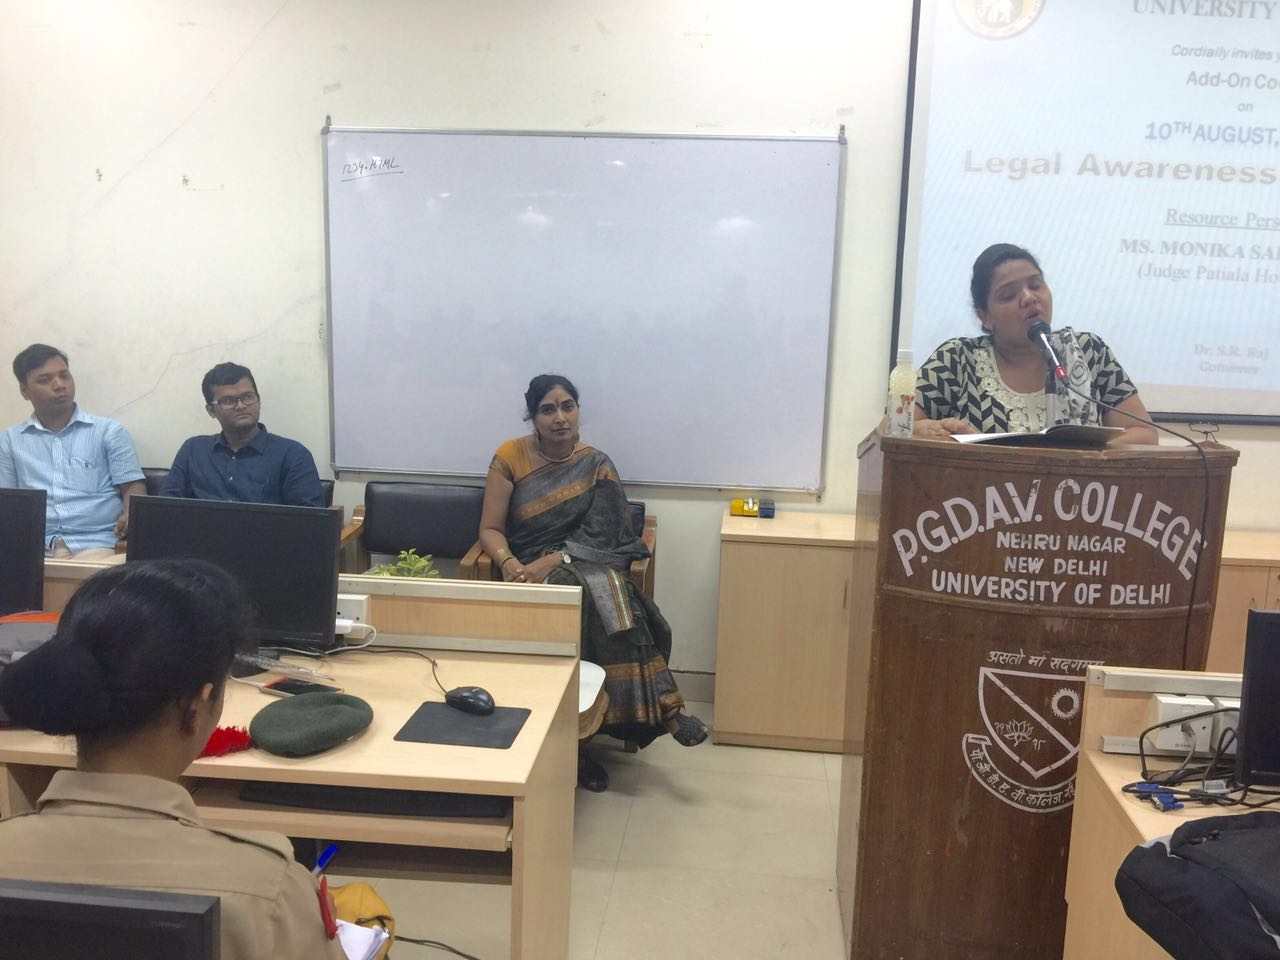 New Delhi District Legal Services Authority Organised Legal Literacy Programe in PGDAV College on 10.08.2016 and Ld. Secretary Ms. Monika Saroha Delivered a lecture on Domestic Violence.